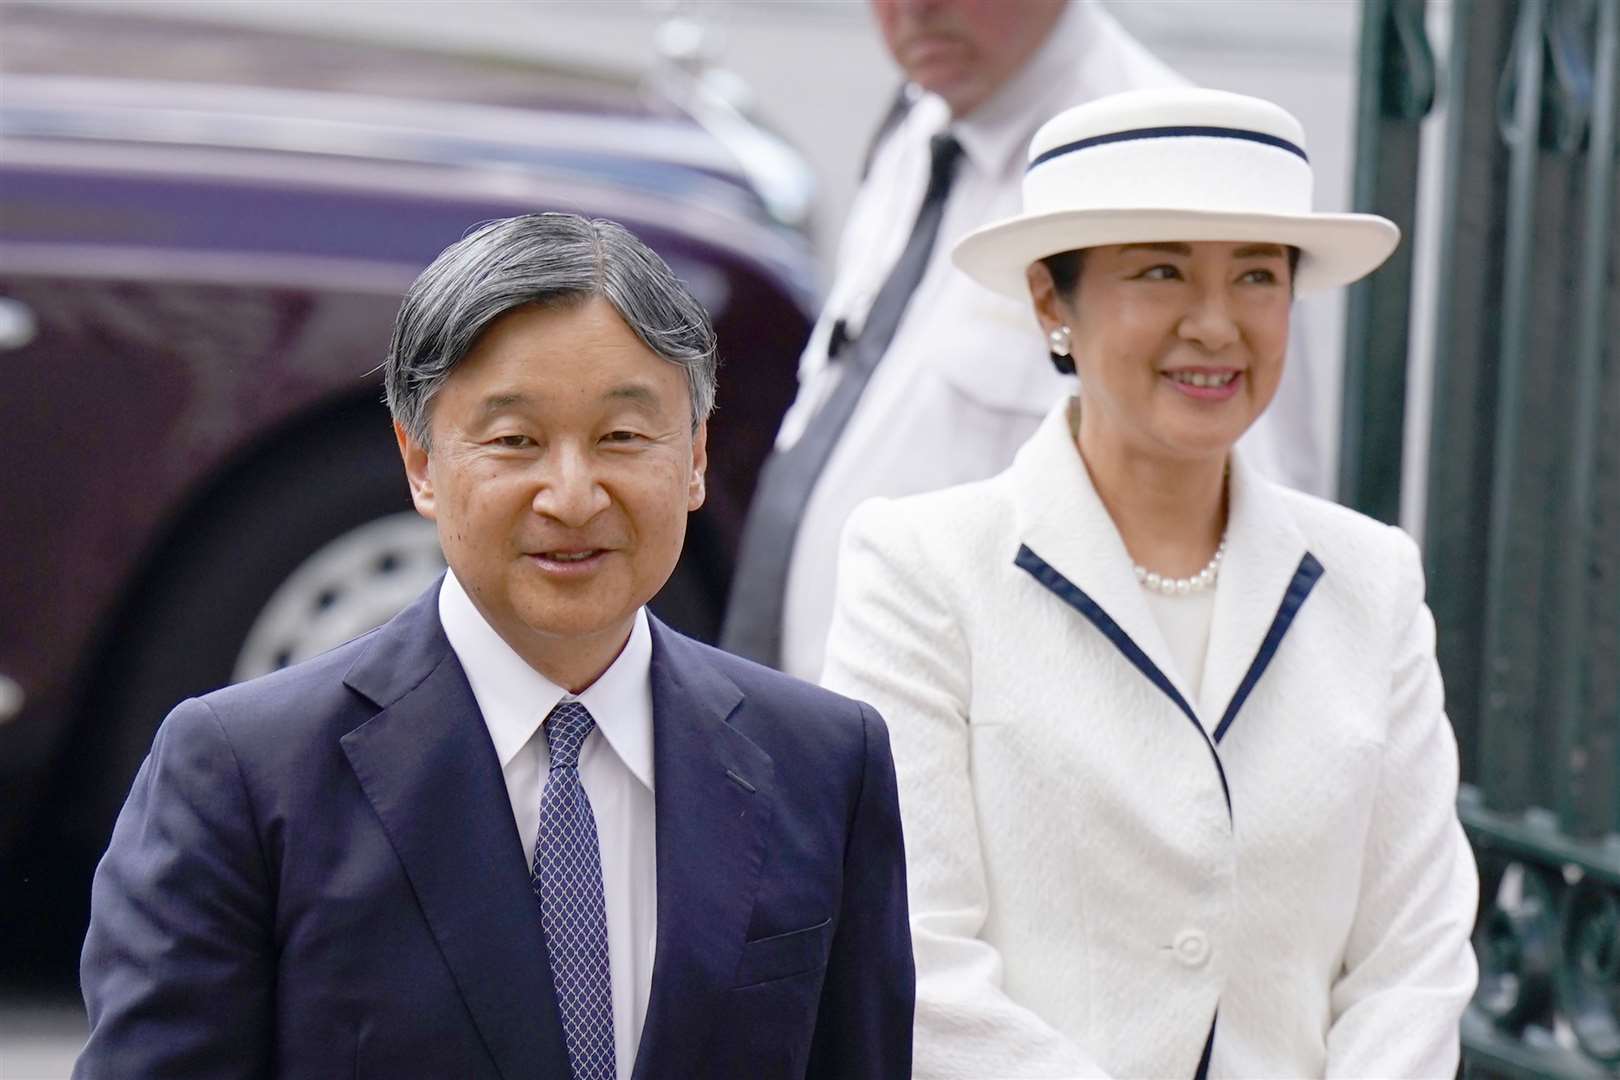 Emperor Naruhito and his wife, Empress Masako of Japan, arrive for a tour of Westminster Abbey, London (Jordan Pettitt/PA)